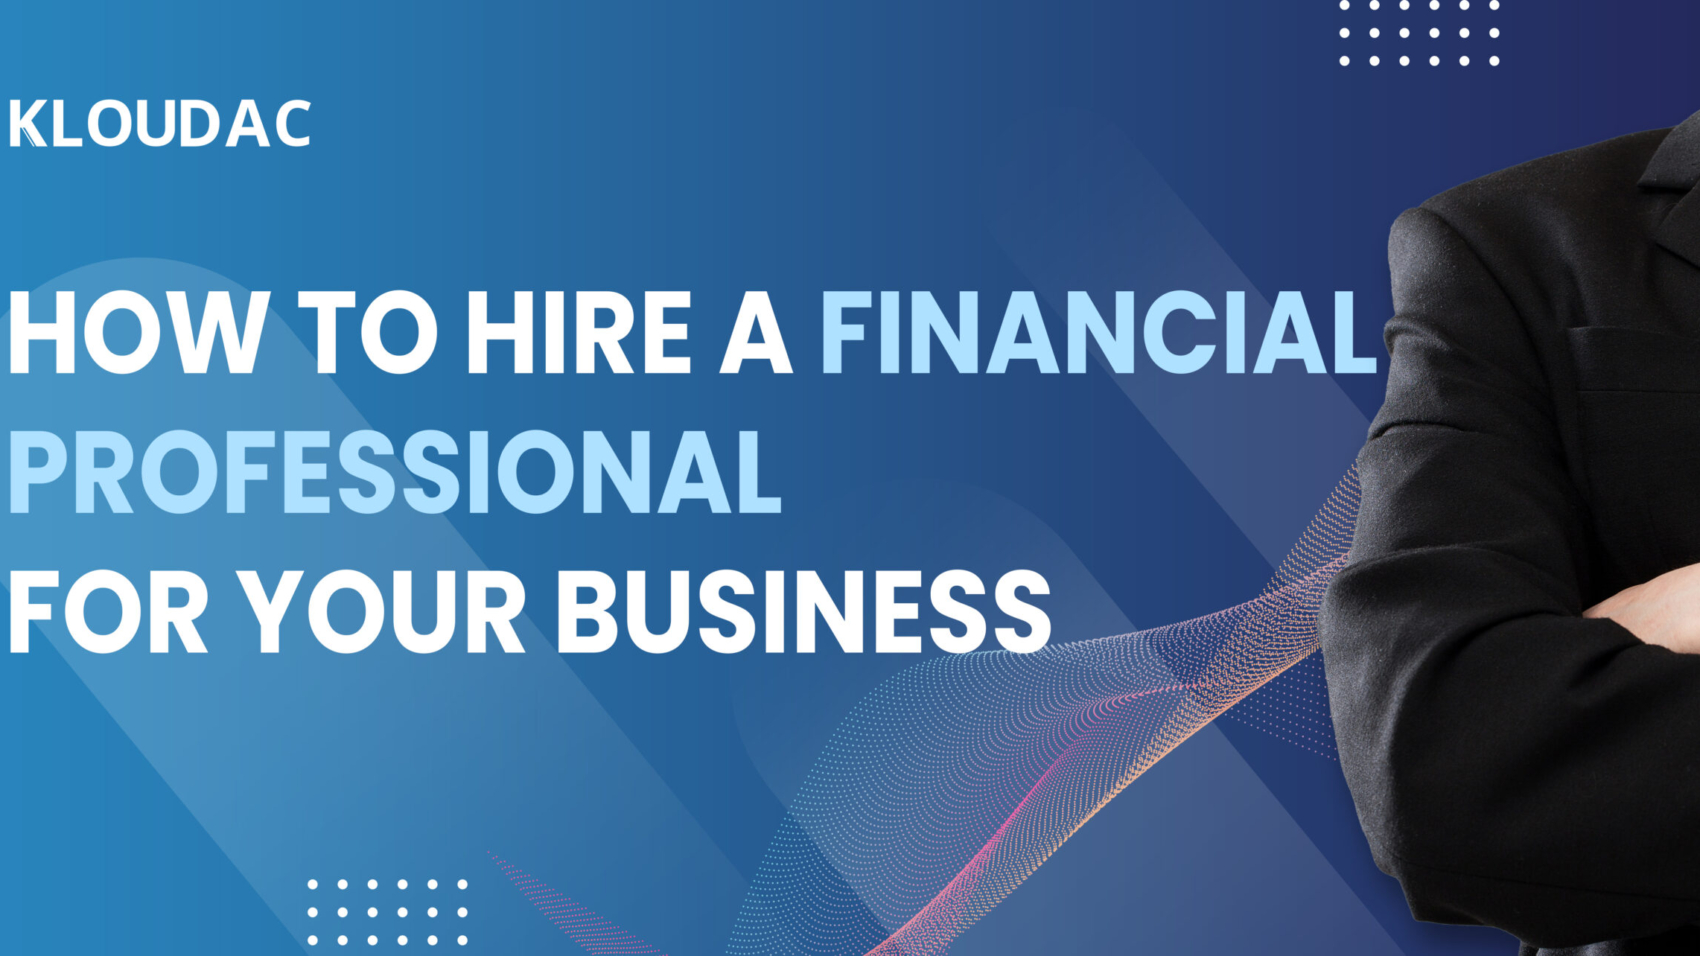 How to hire a financial professional for your business